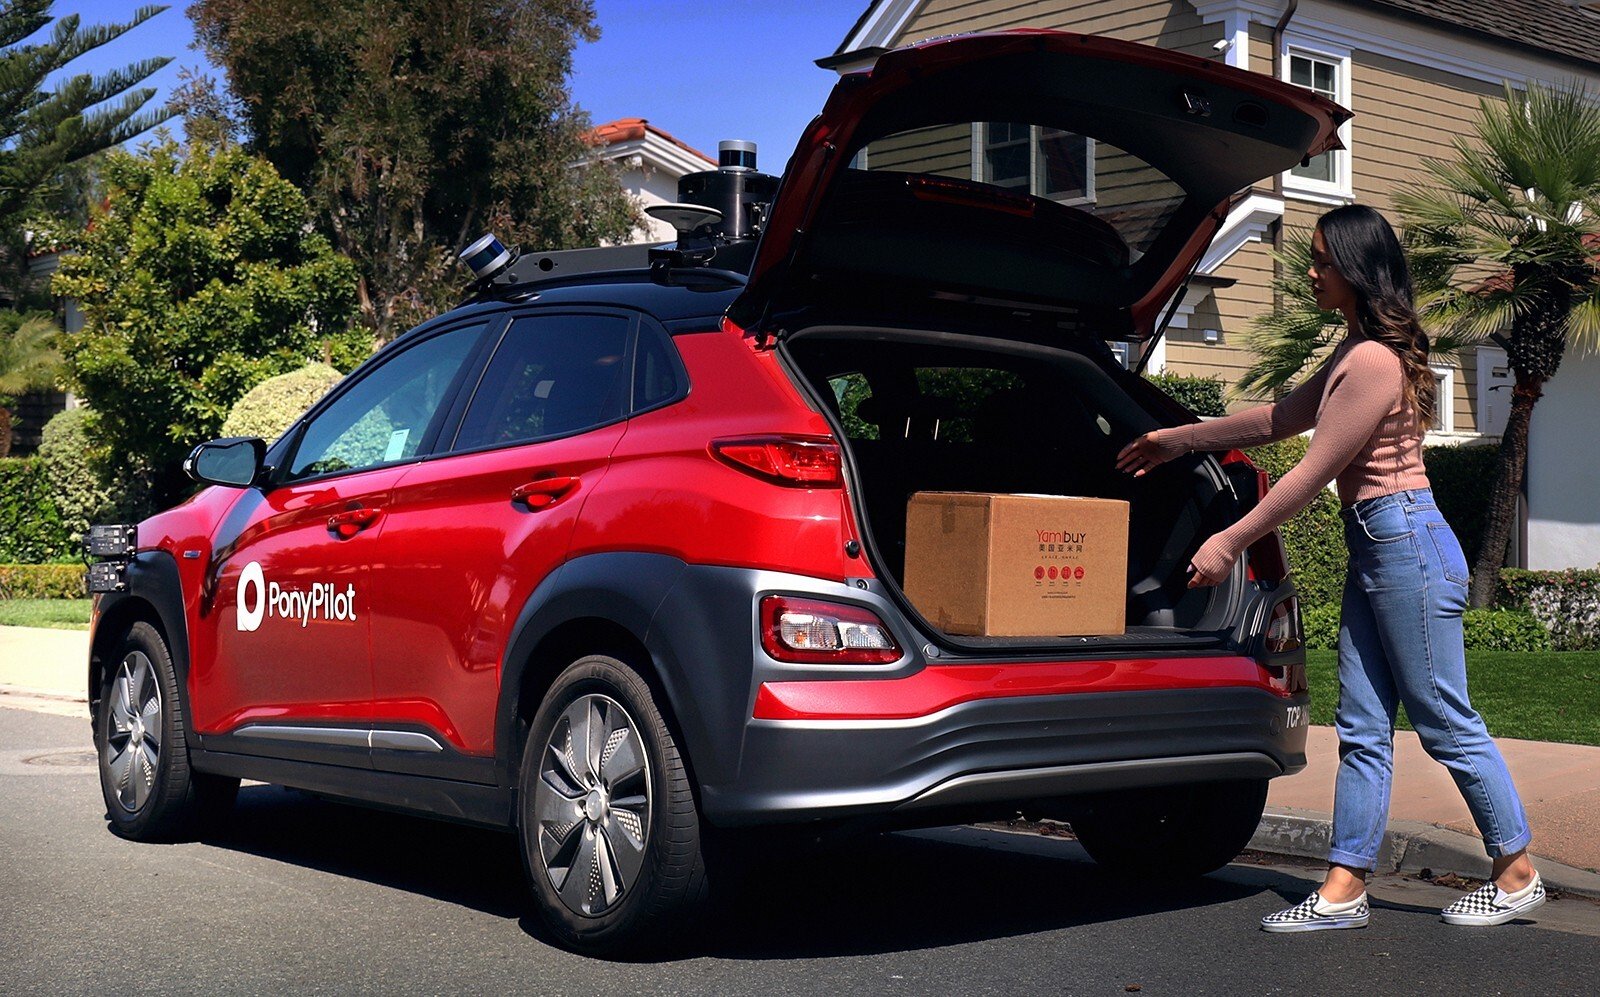 With an initial fleet of 10 autonomous vehicles, each is expected to load 10 to 20 packages per trip and deliver around 100 a day. Photo: Handout